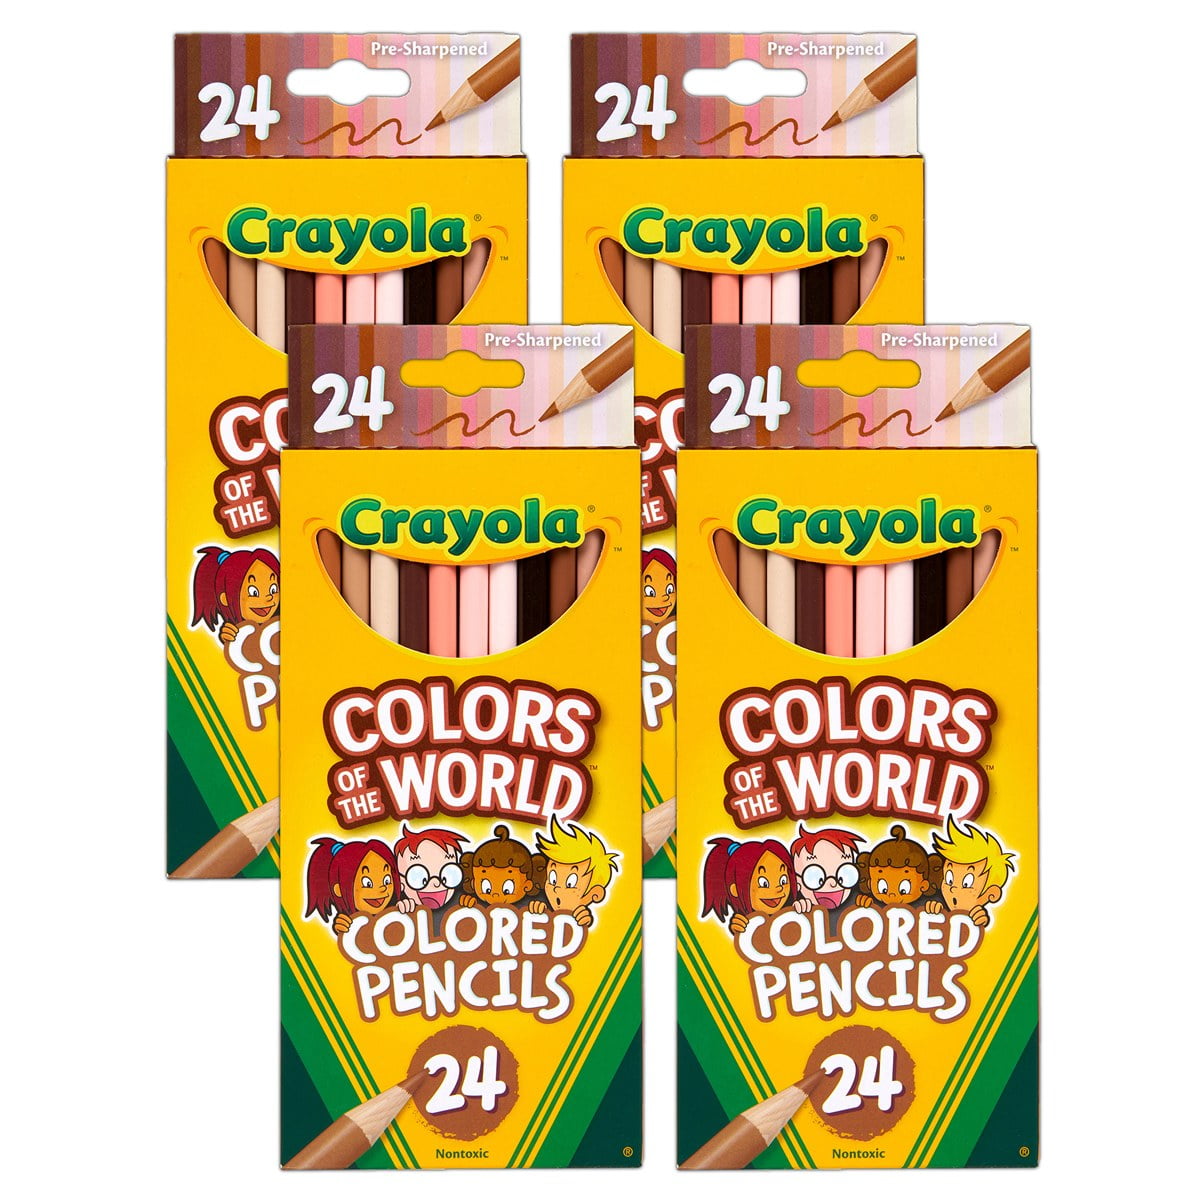 Crayola® Colors of the World Colored Pencils, 24ct.